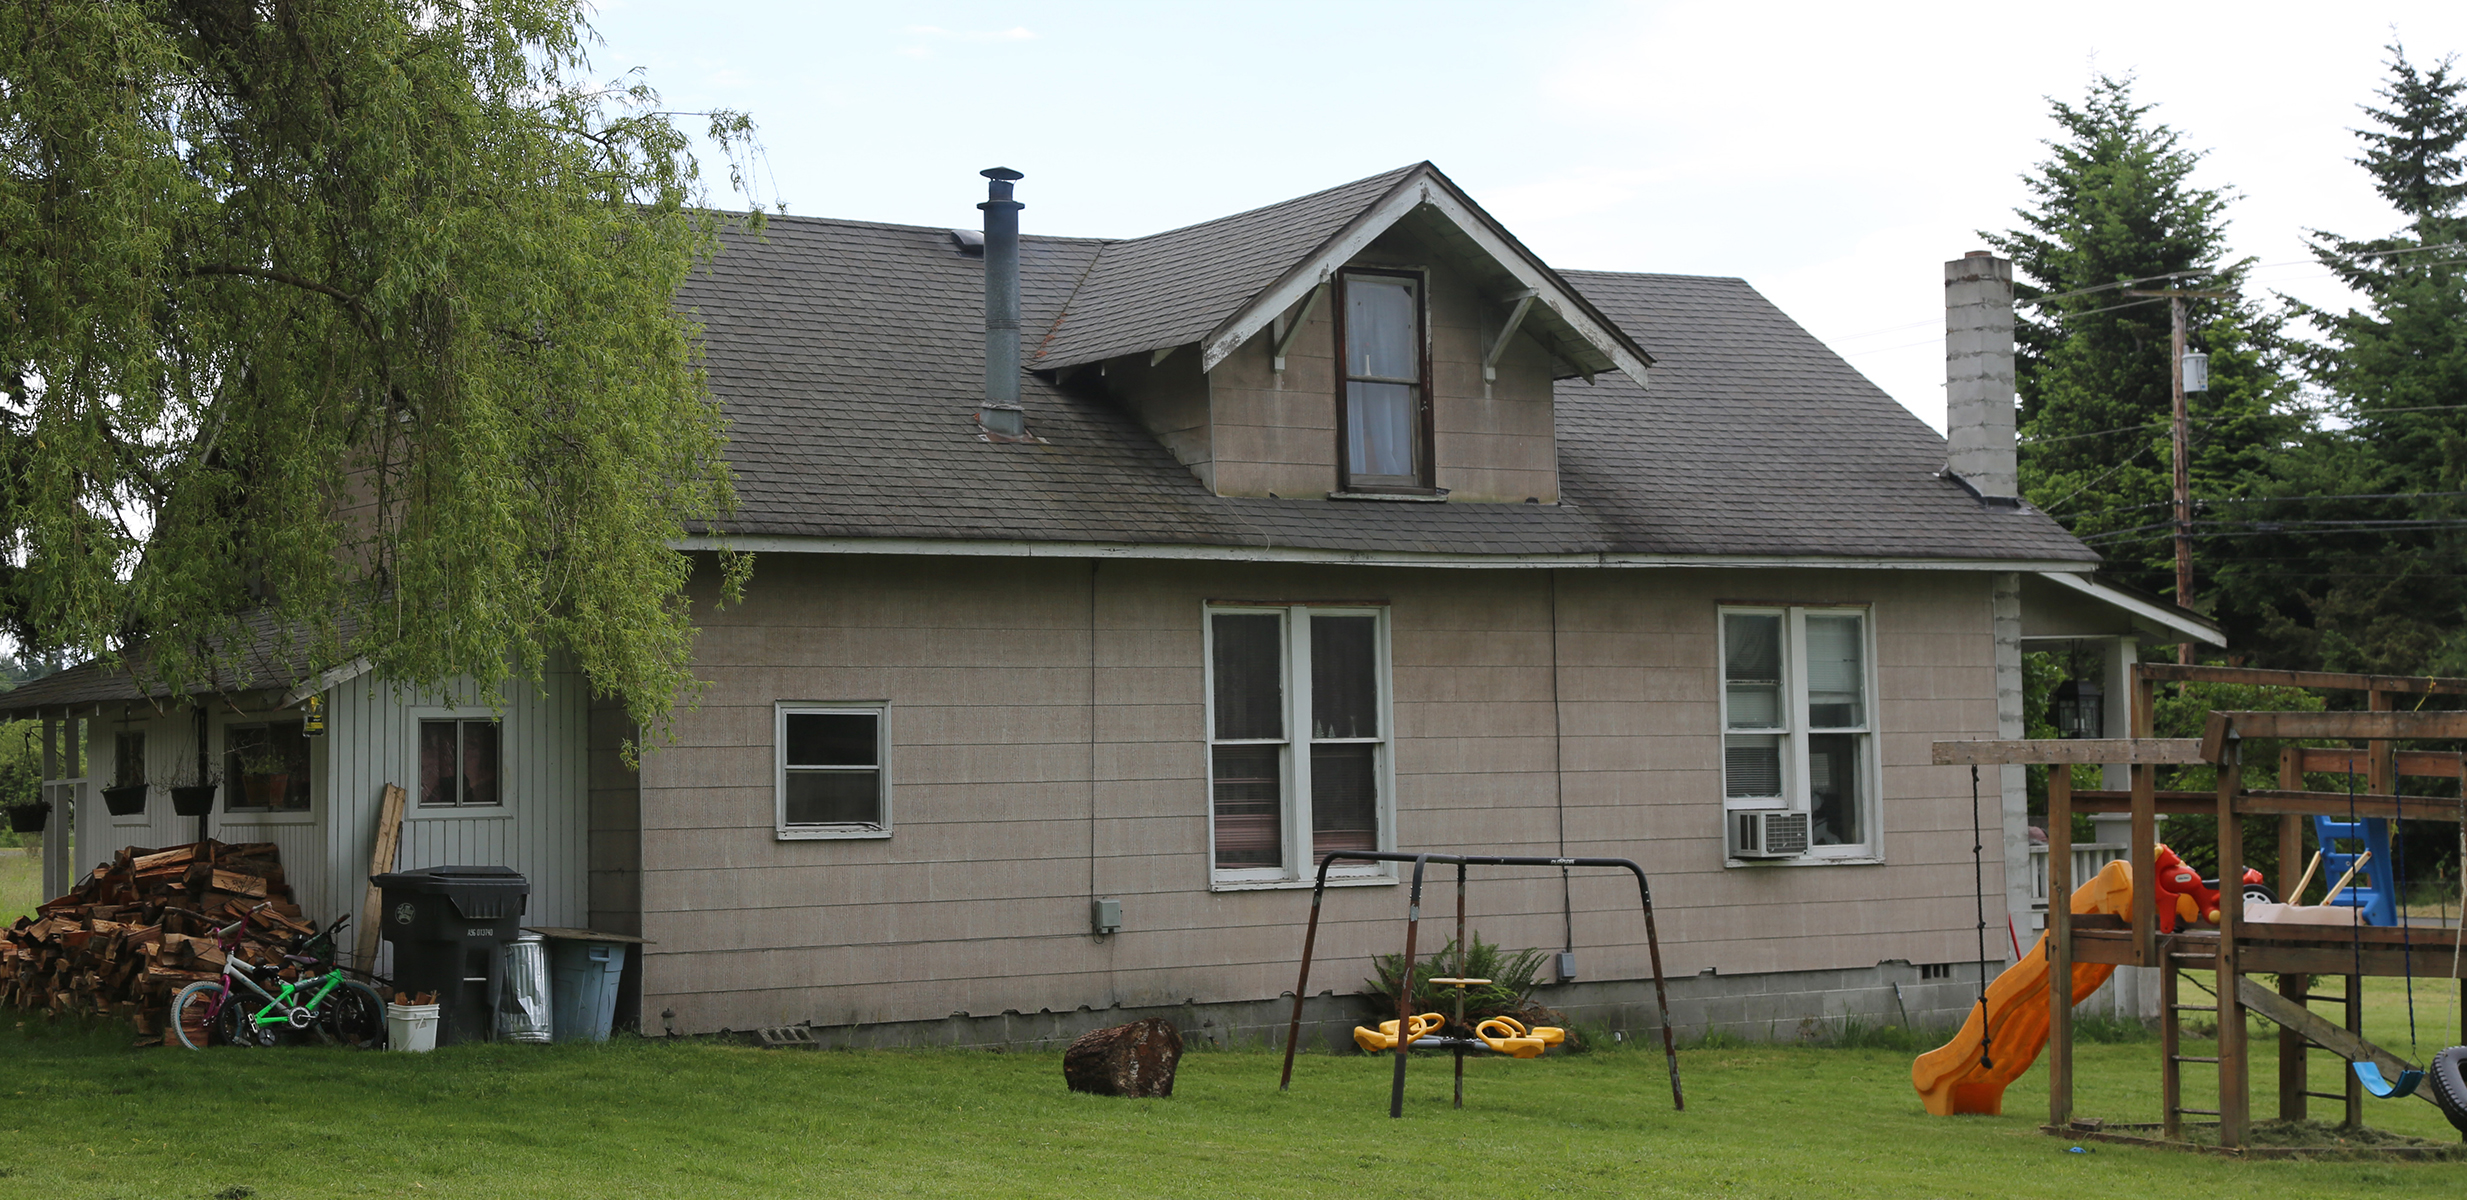 The home of Olson’s mother, where Olson and her children stayed after being evicted in 2012.